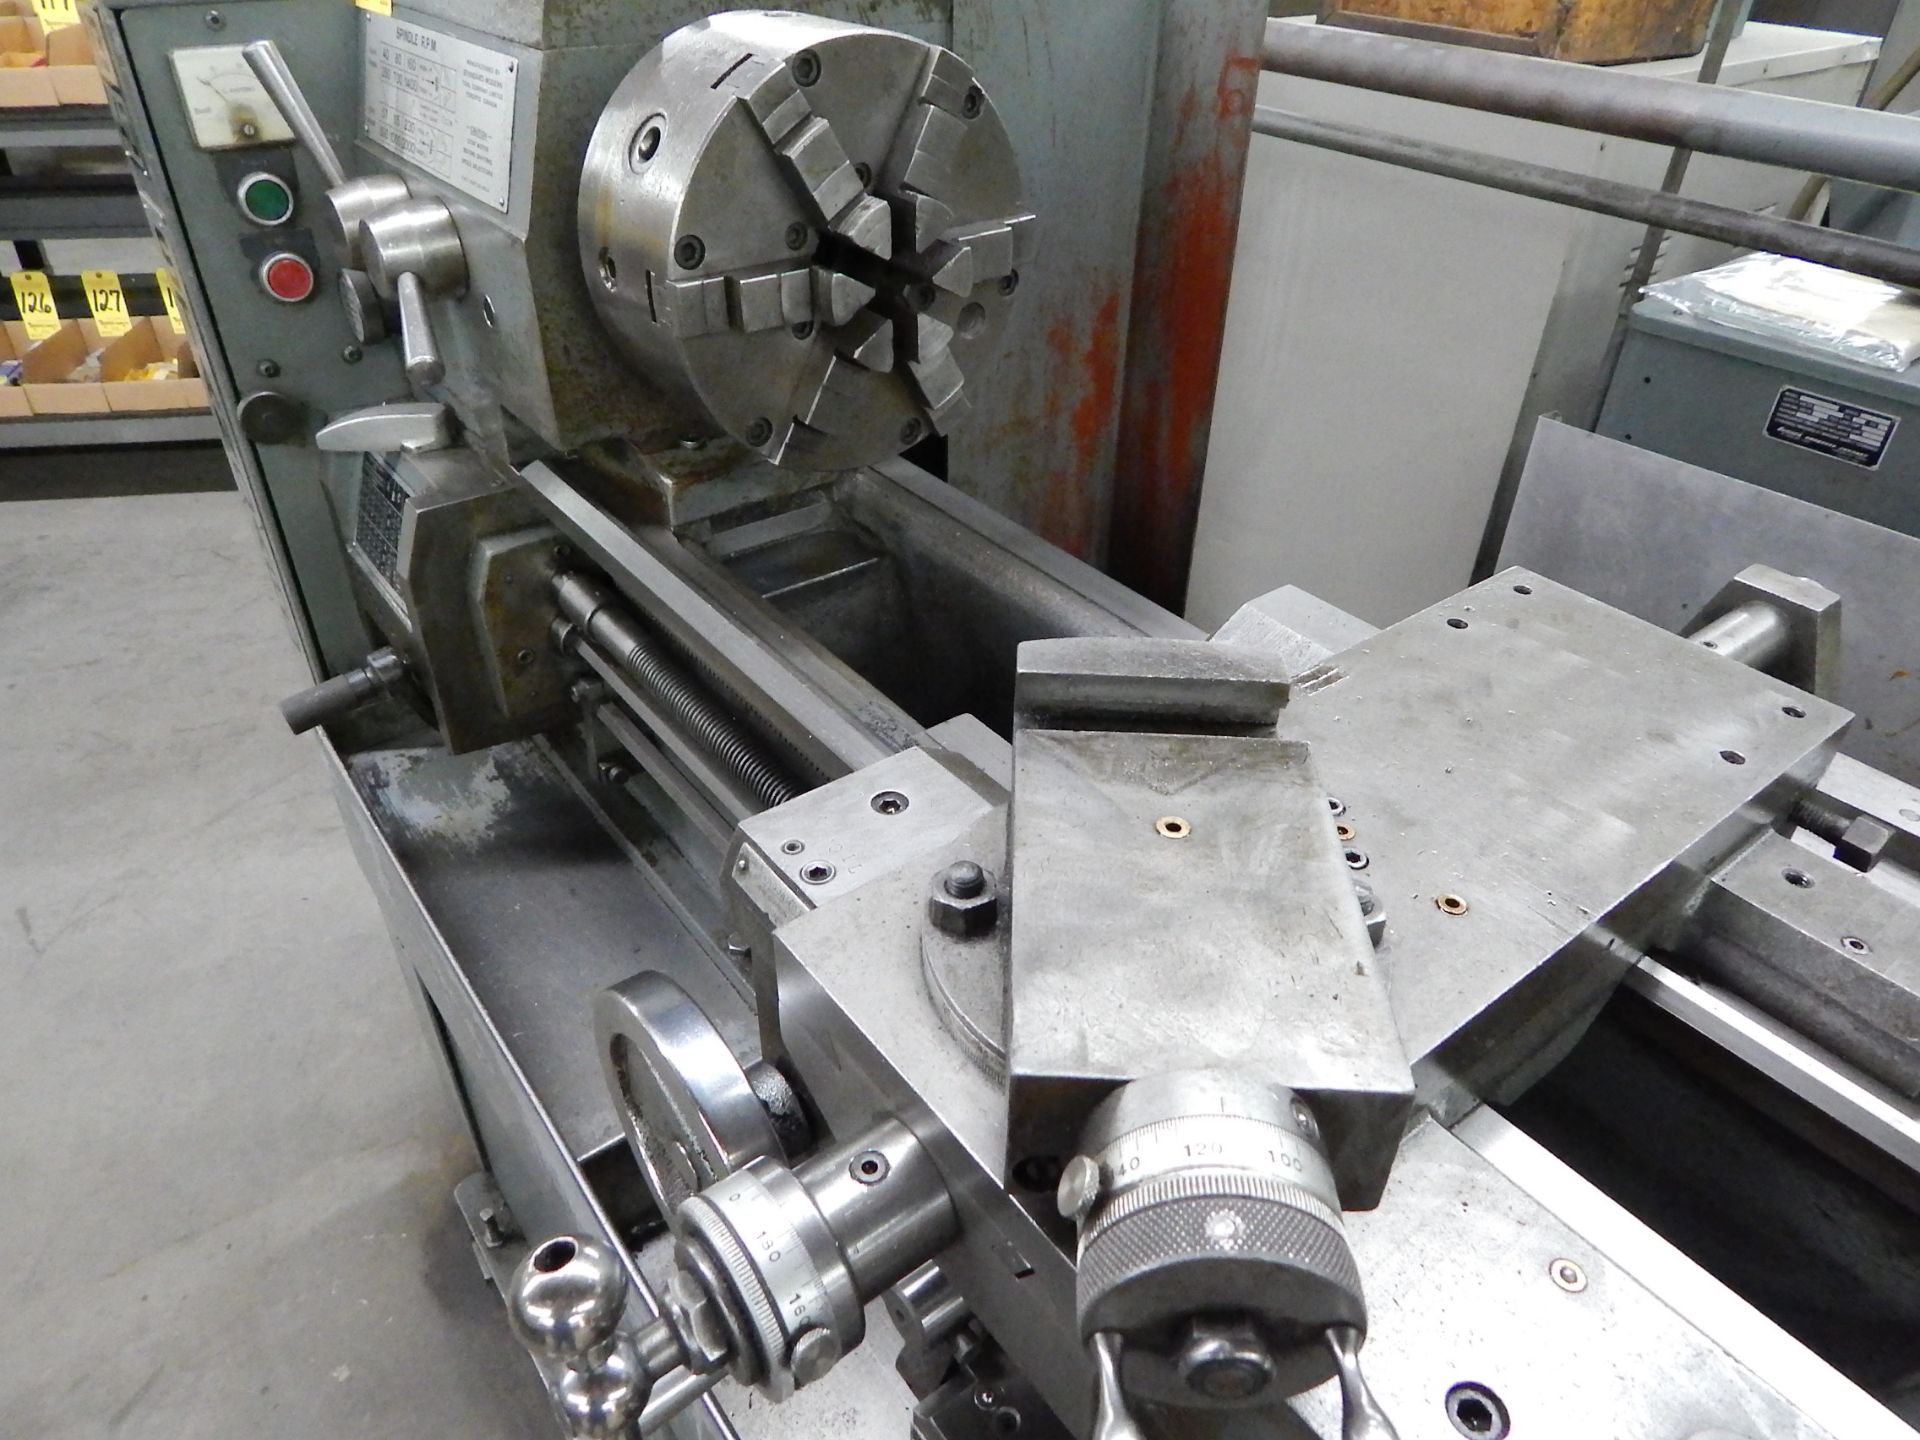 Standard Modern Model 1340 tool Room Lathe, SN 8812, 13" x 40", Taper Attachment, 8" 6-Jaw Chuck - Image 3 of 14